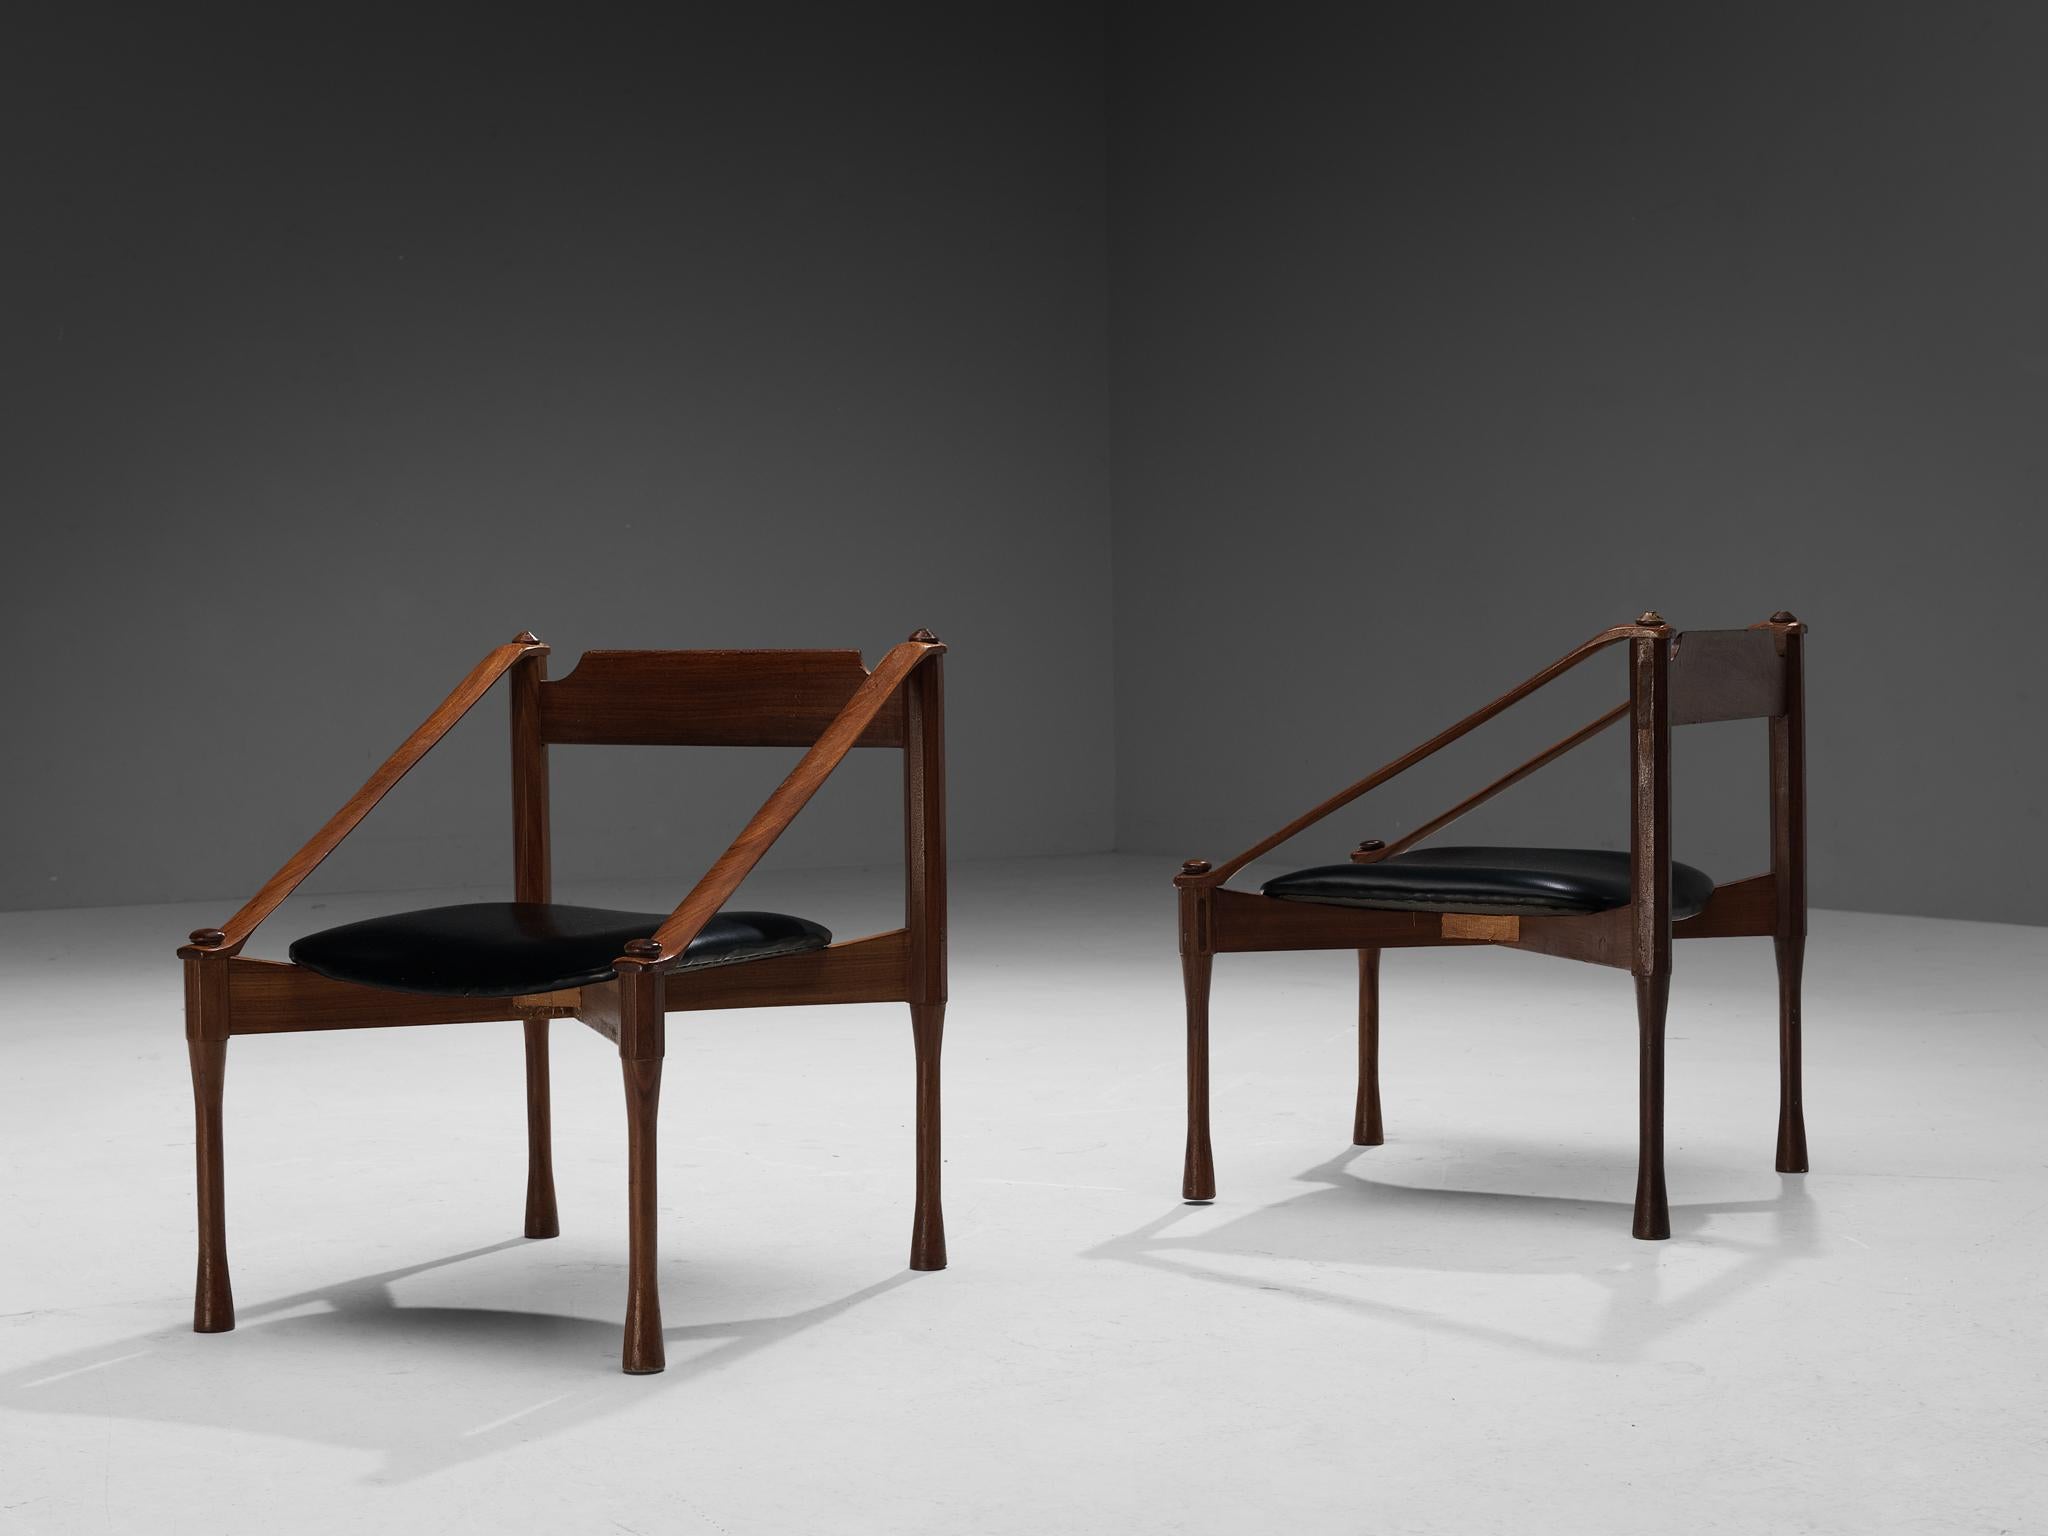 Giulio Moscatelli, pair of armchairs, walnut, leatherette, Italy, ca. 1950

These chairs by Giulio Moscatelli are distinctive in its execution. The legs are beautifully sculpted, showing concave carvings. The diagonal placed armrests give a sense of